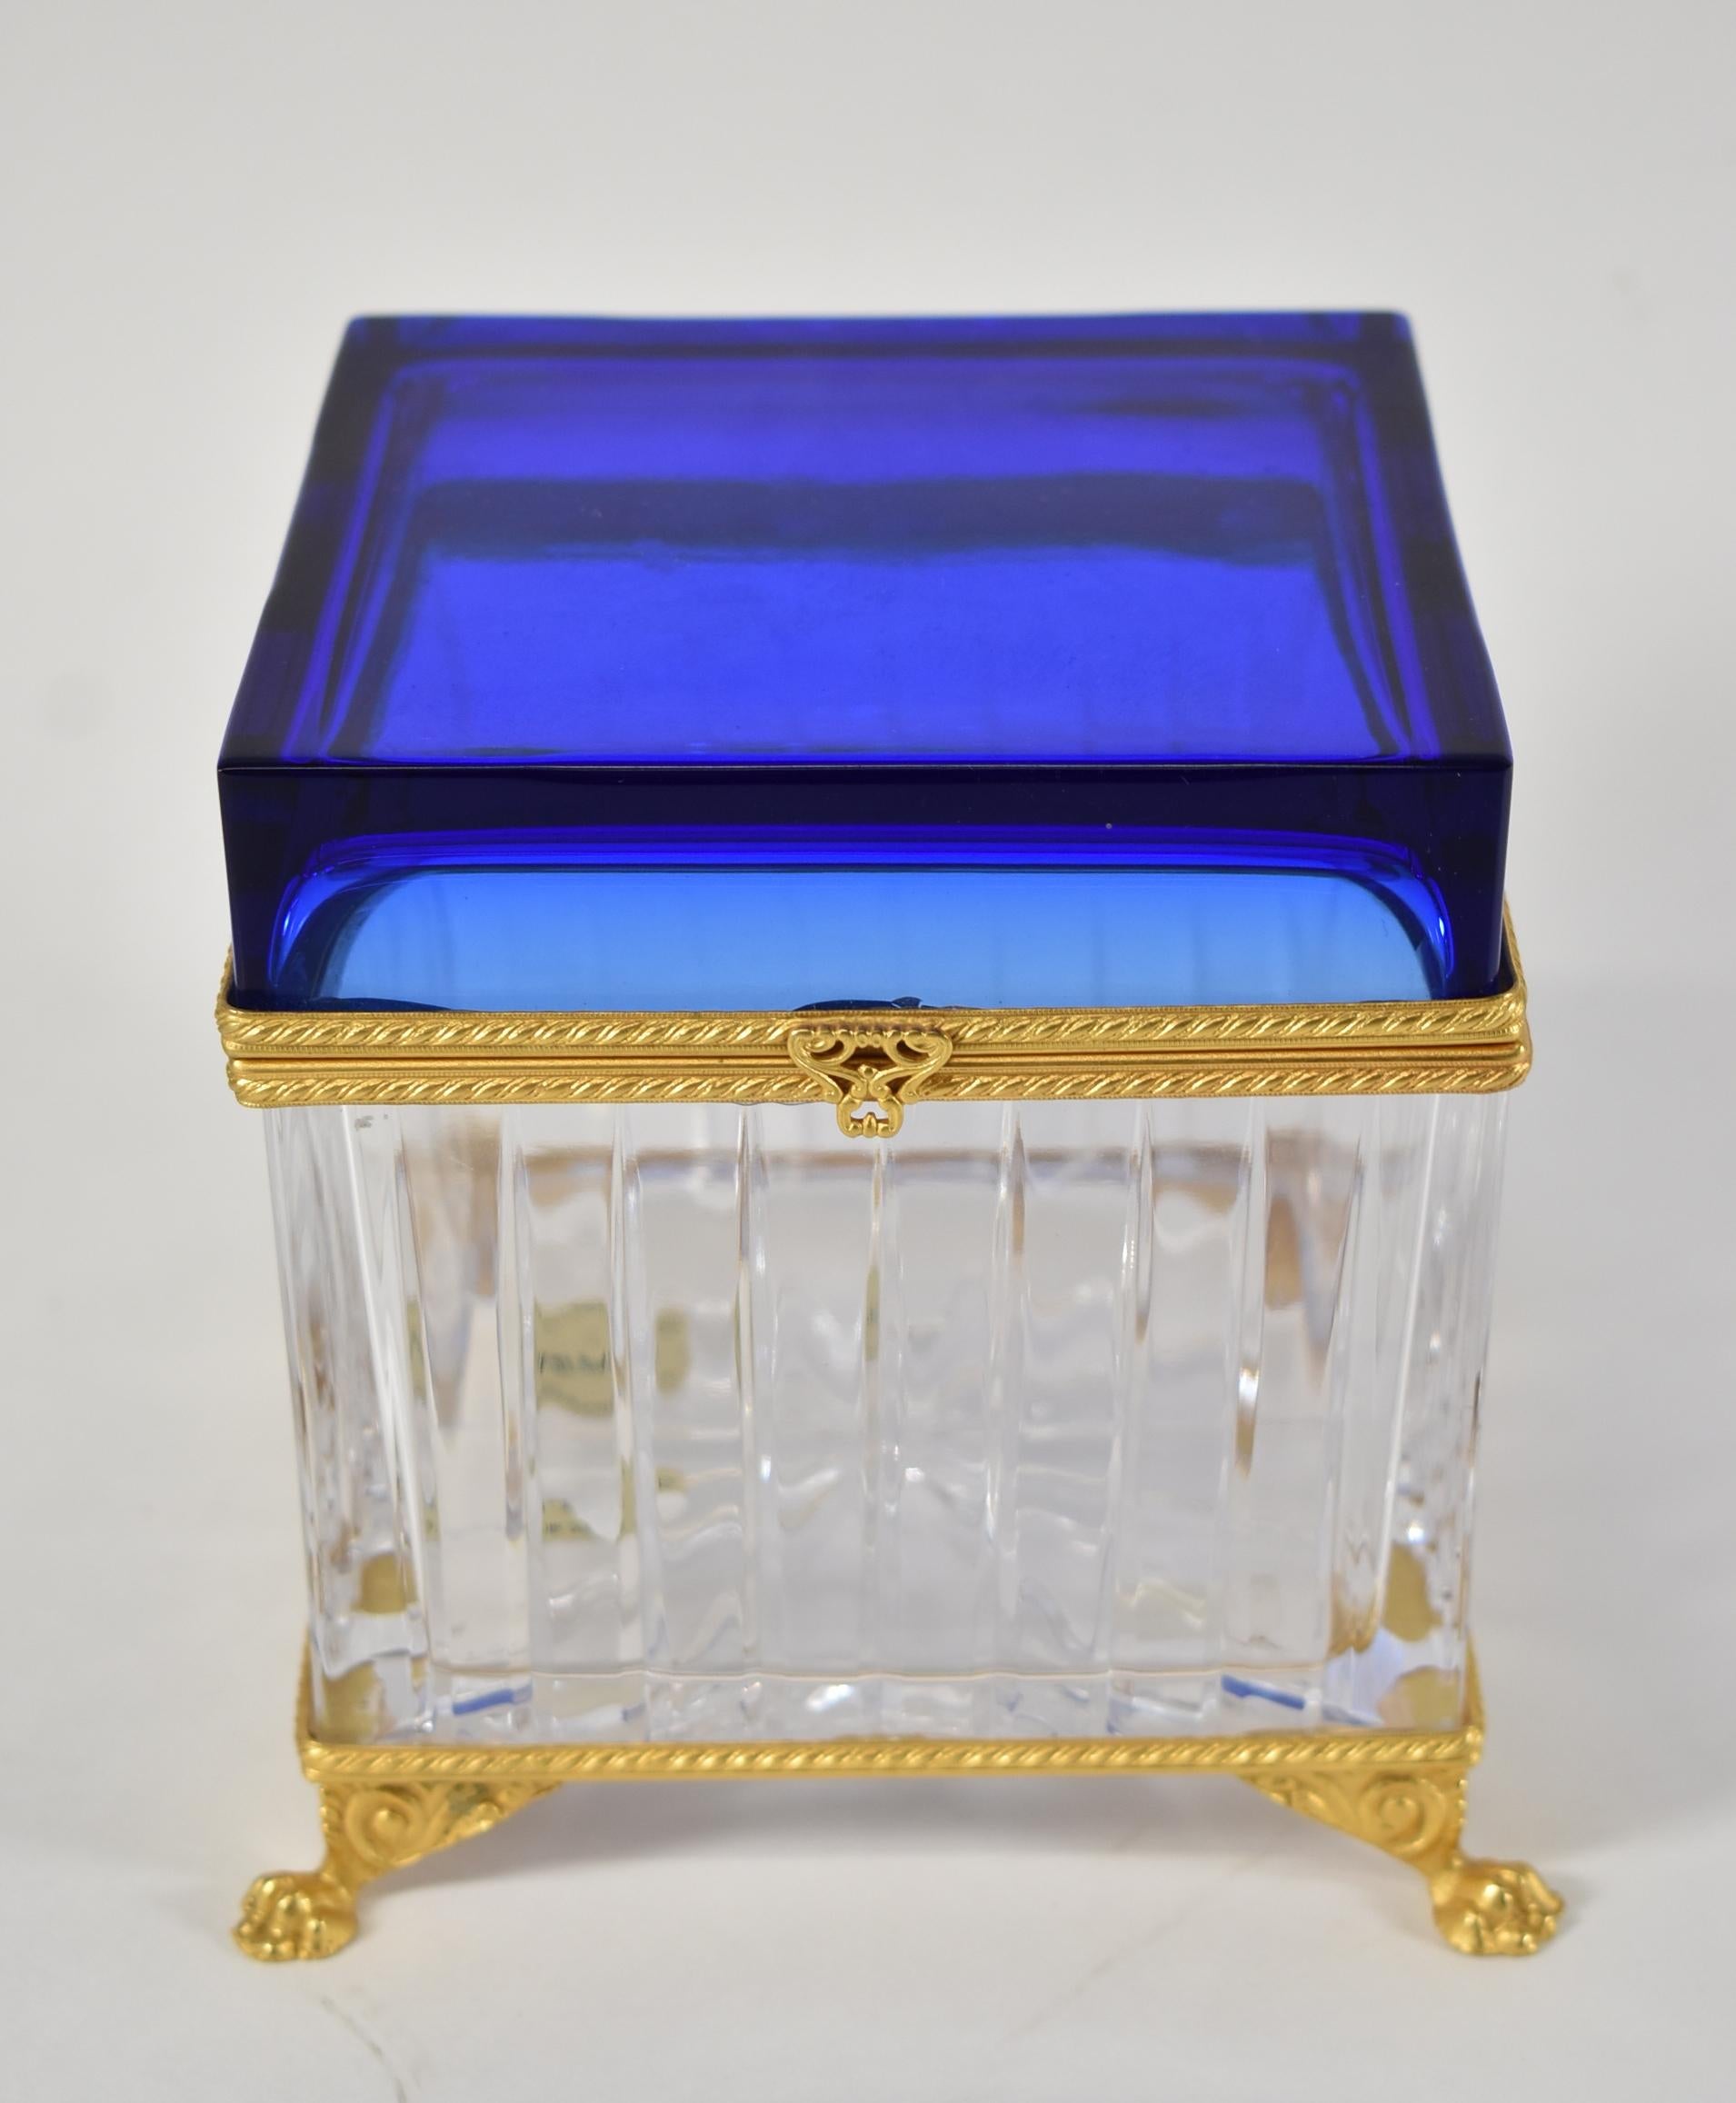 Cobalt blue and clear cut glass Italian Pitti Collection by Baldi lidded box. 24k gold dore frame and paw feet.